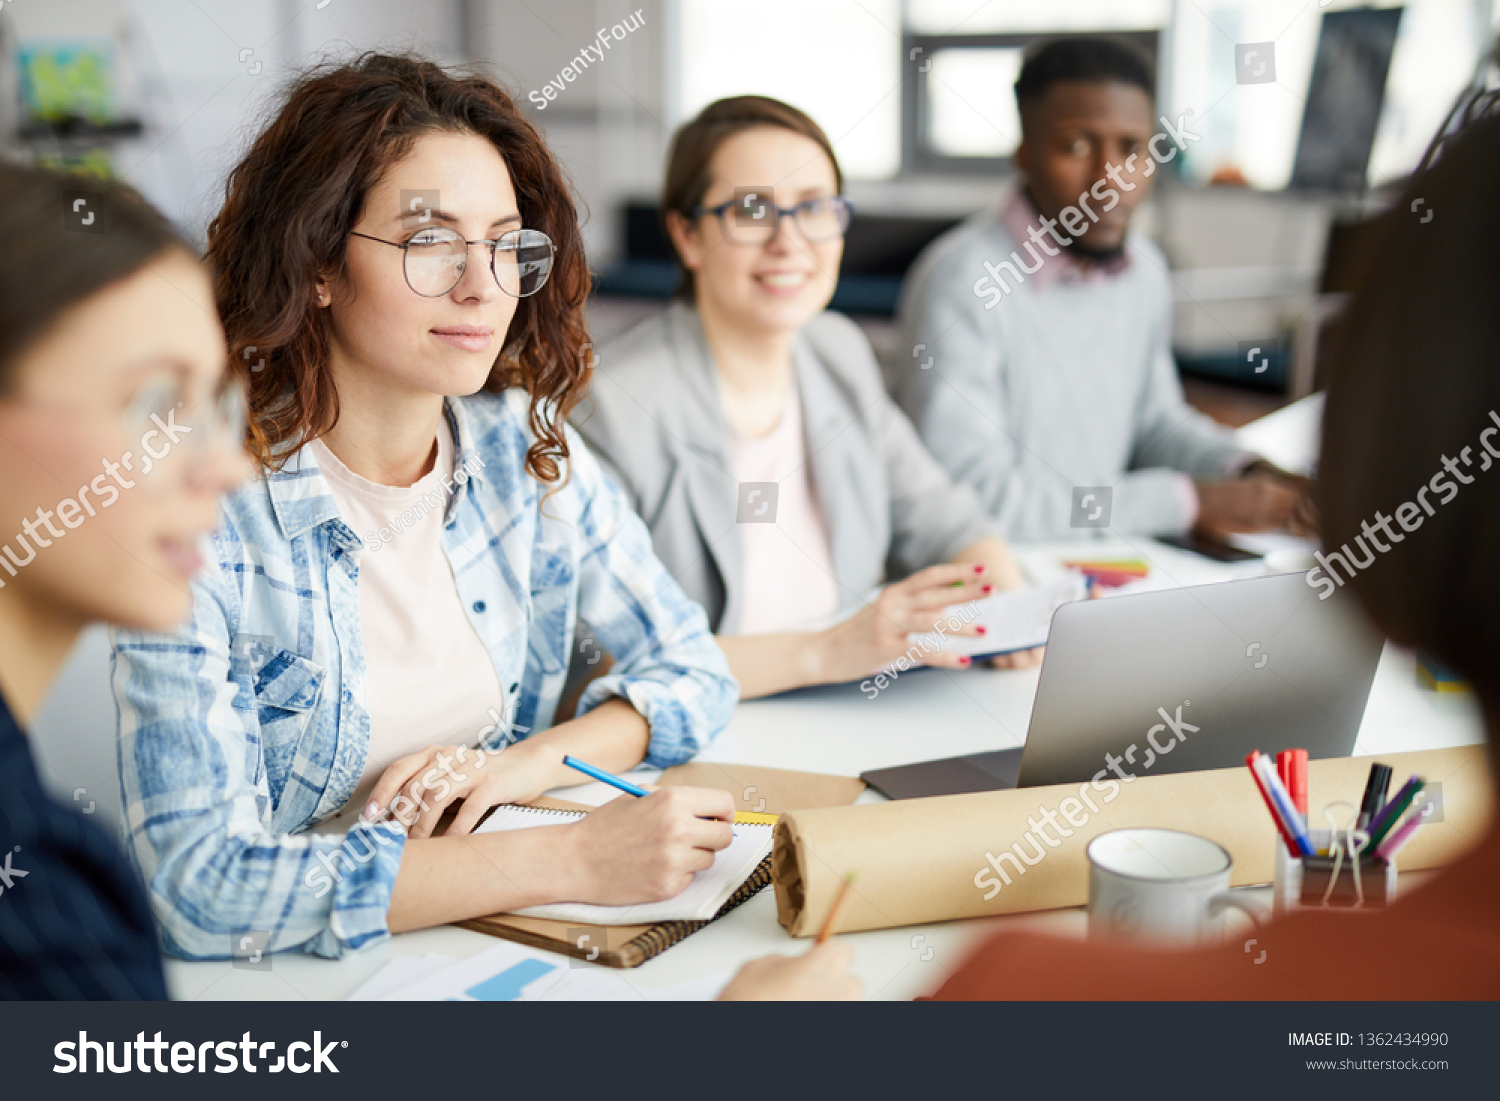 Group of contemporary people working in meeting focus on curly haired young woman in foreground, copy space #1362434990